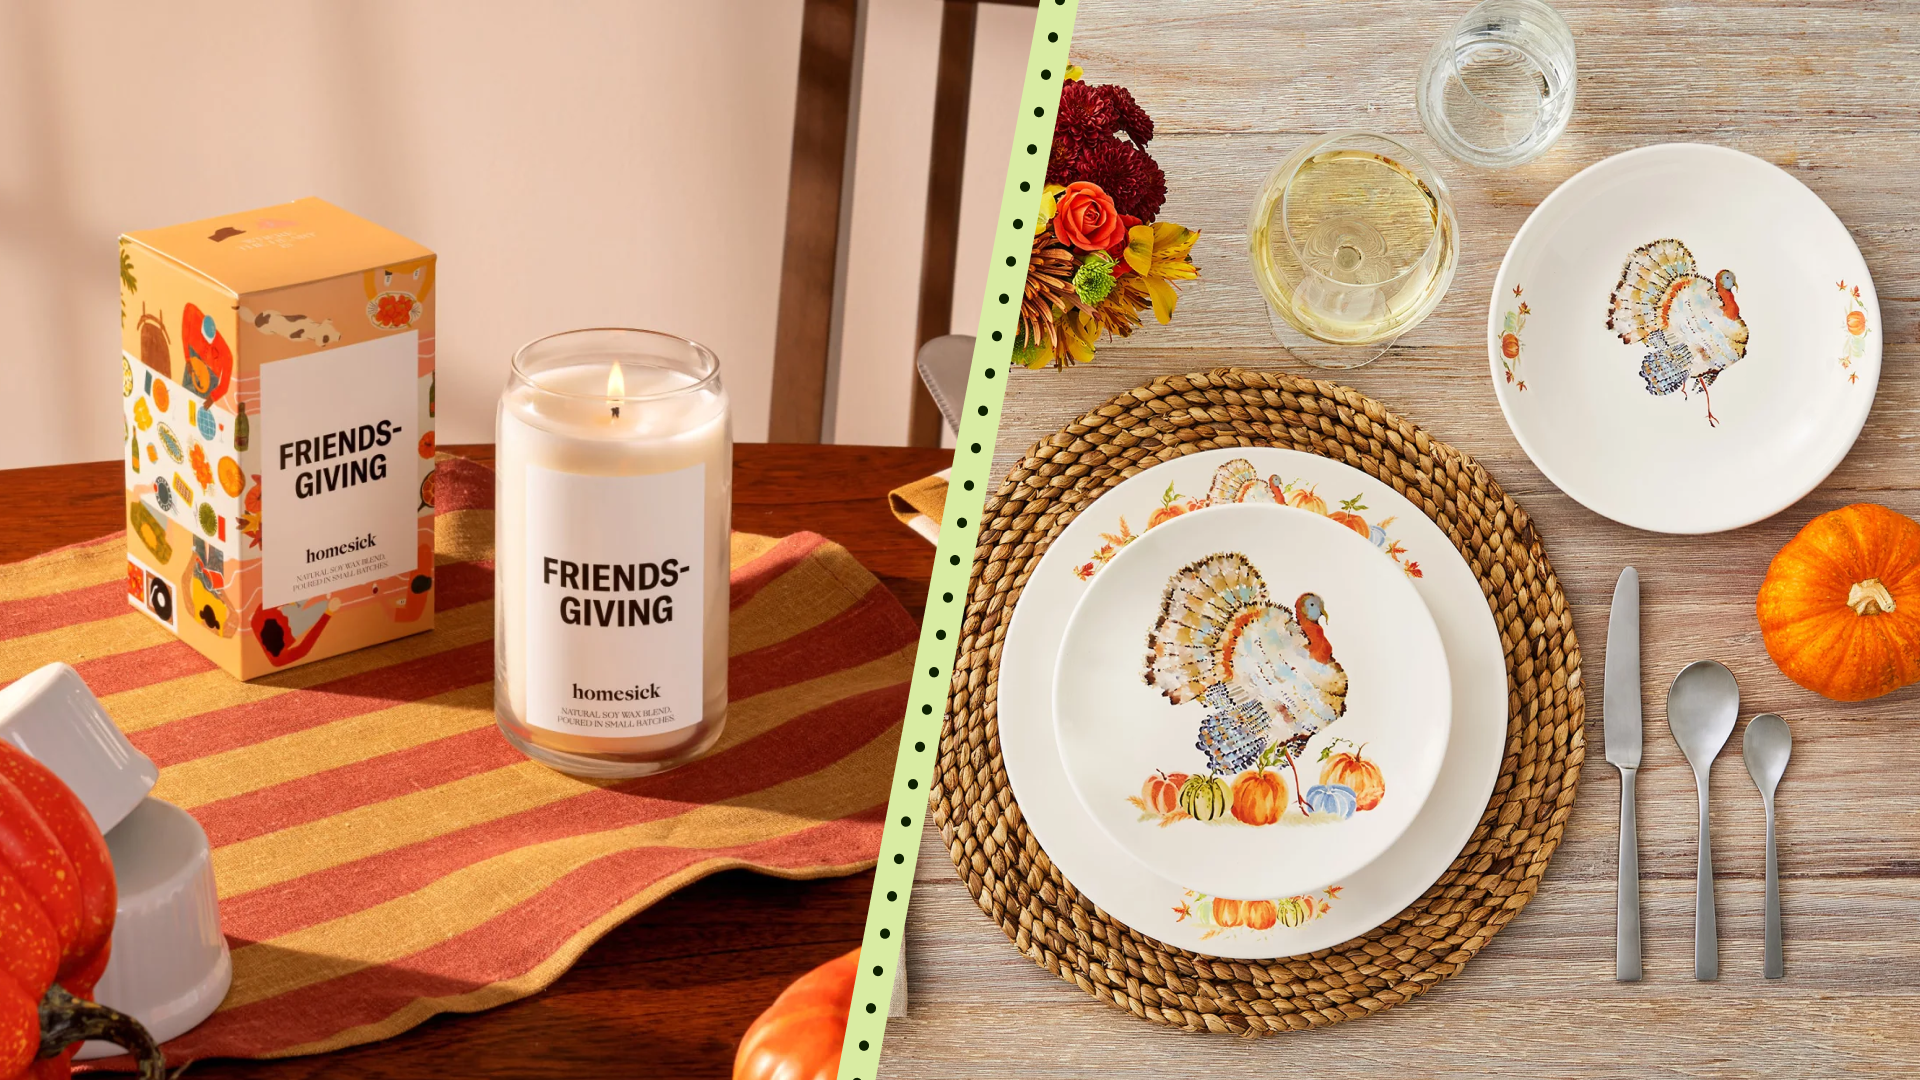  11 Friendsgiving Ideas That Are Fun, Festive, and Actually Doable